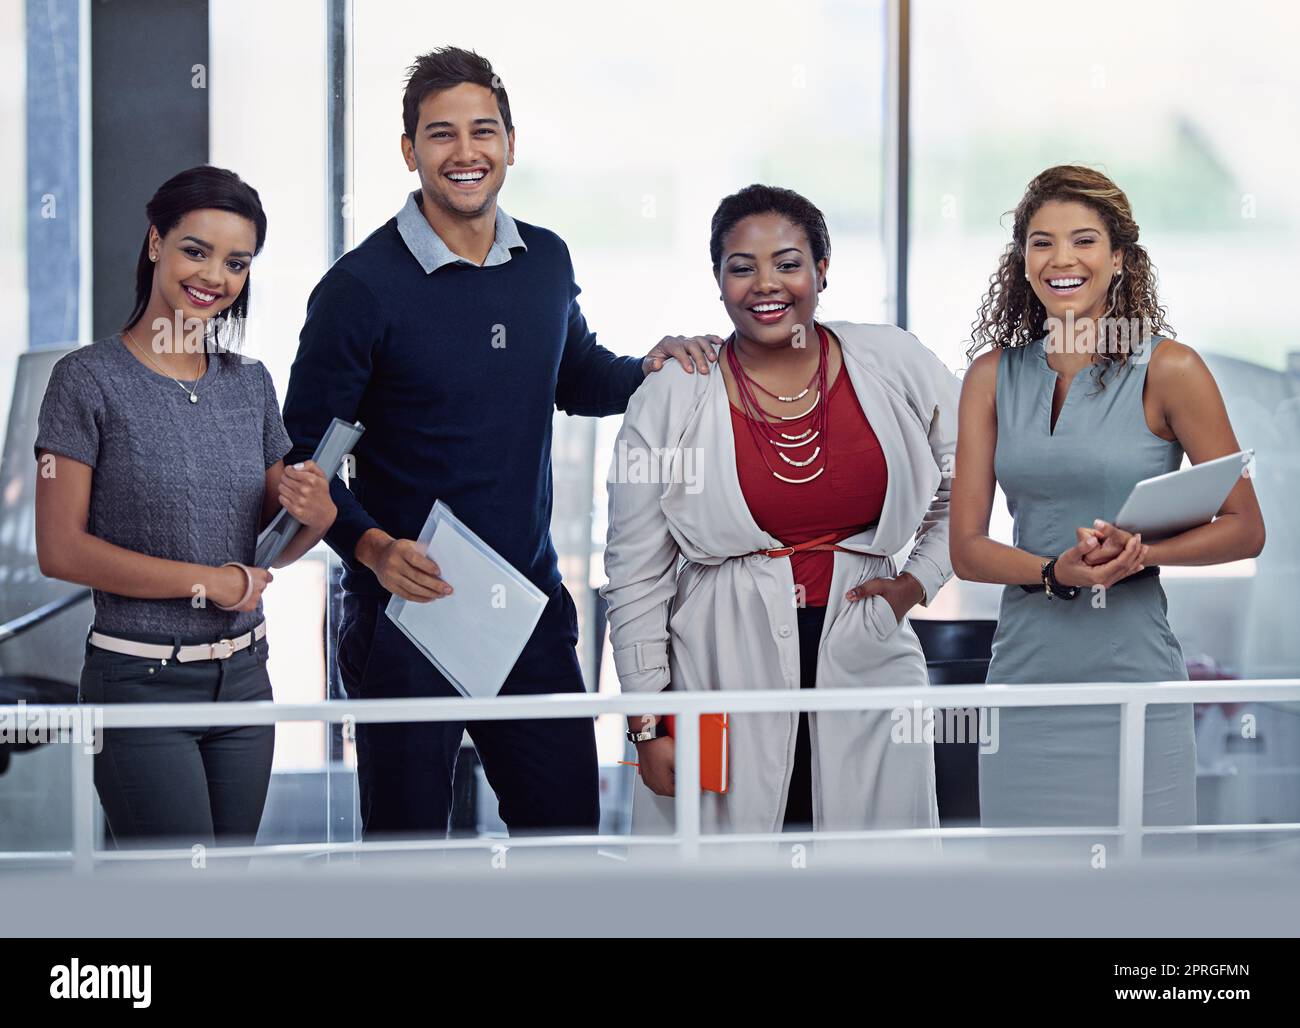 Our success depends on all of us working together. Portrait of a group of smiling colleagues working together in an office. Stock Photo